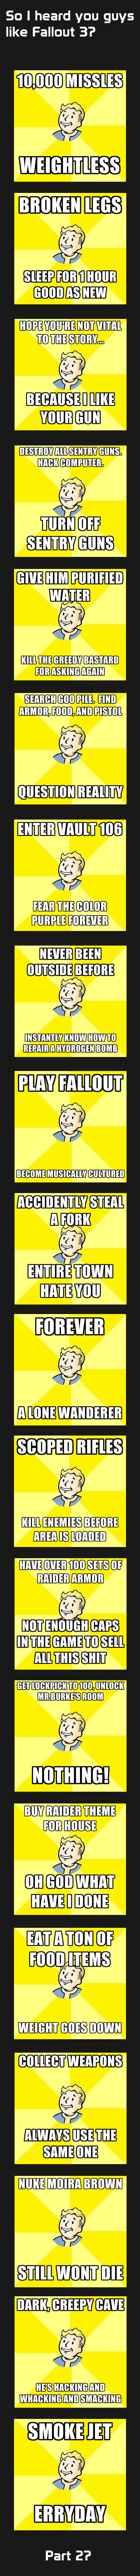 Part 3: www.funnyjunk.com/funny_pictures/2792910/Fallout+3+Comp+Part+Three/